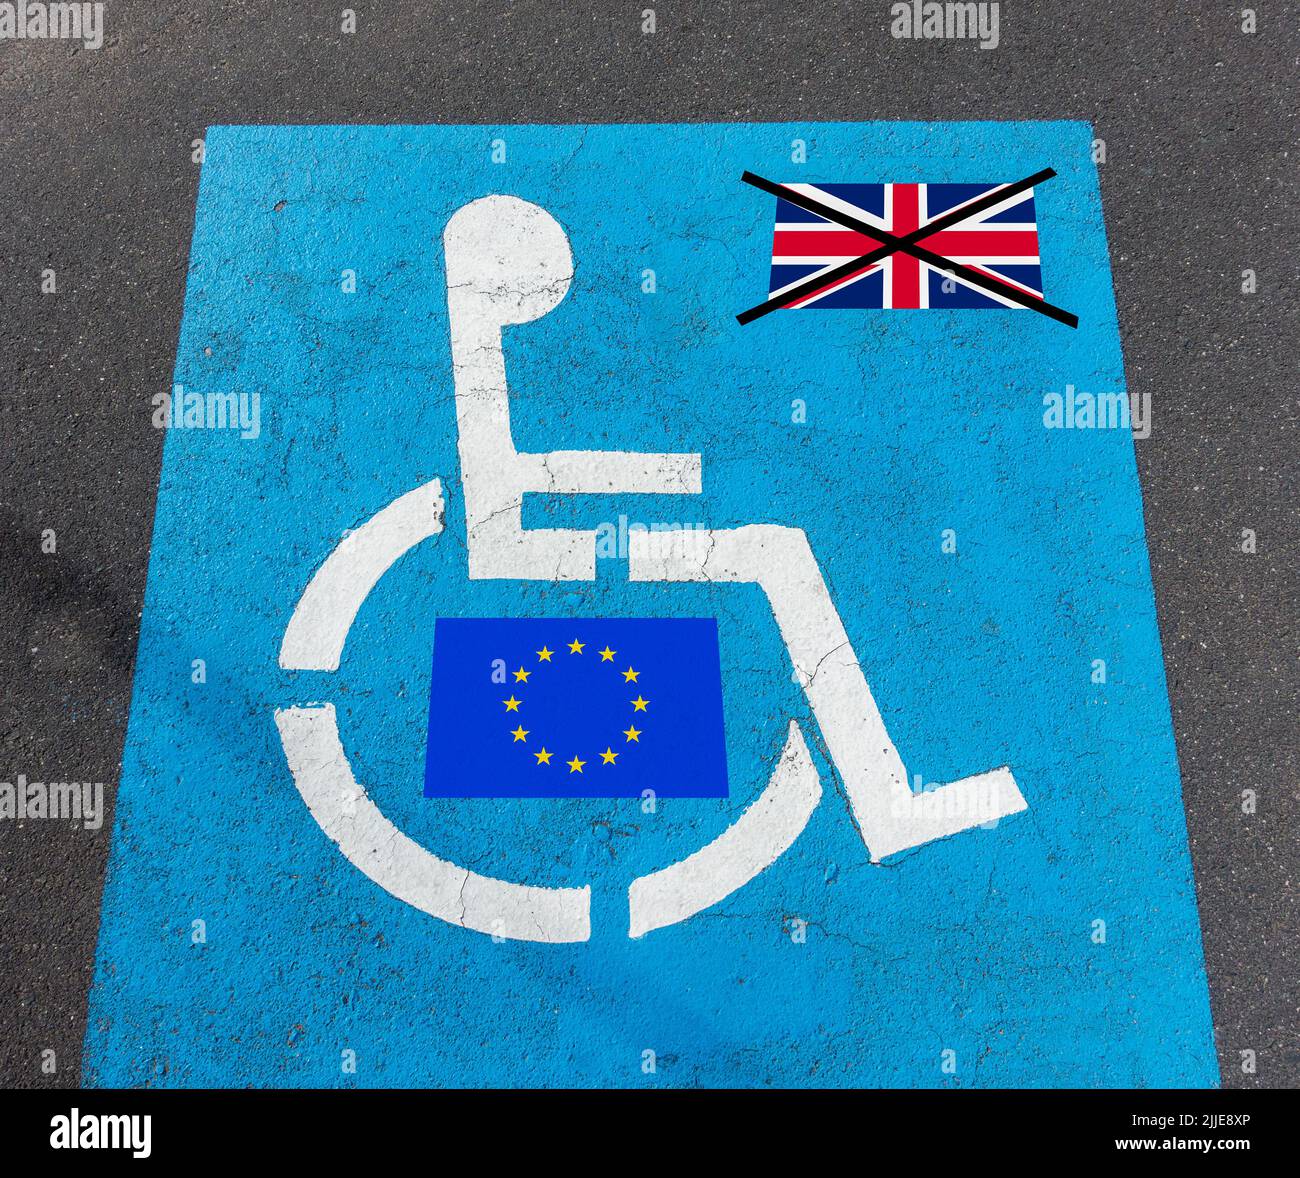 Disabled parking bay with EU and UK flag. Stock Photo